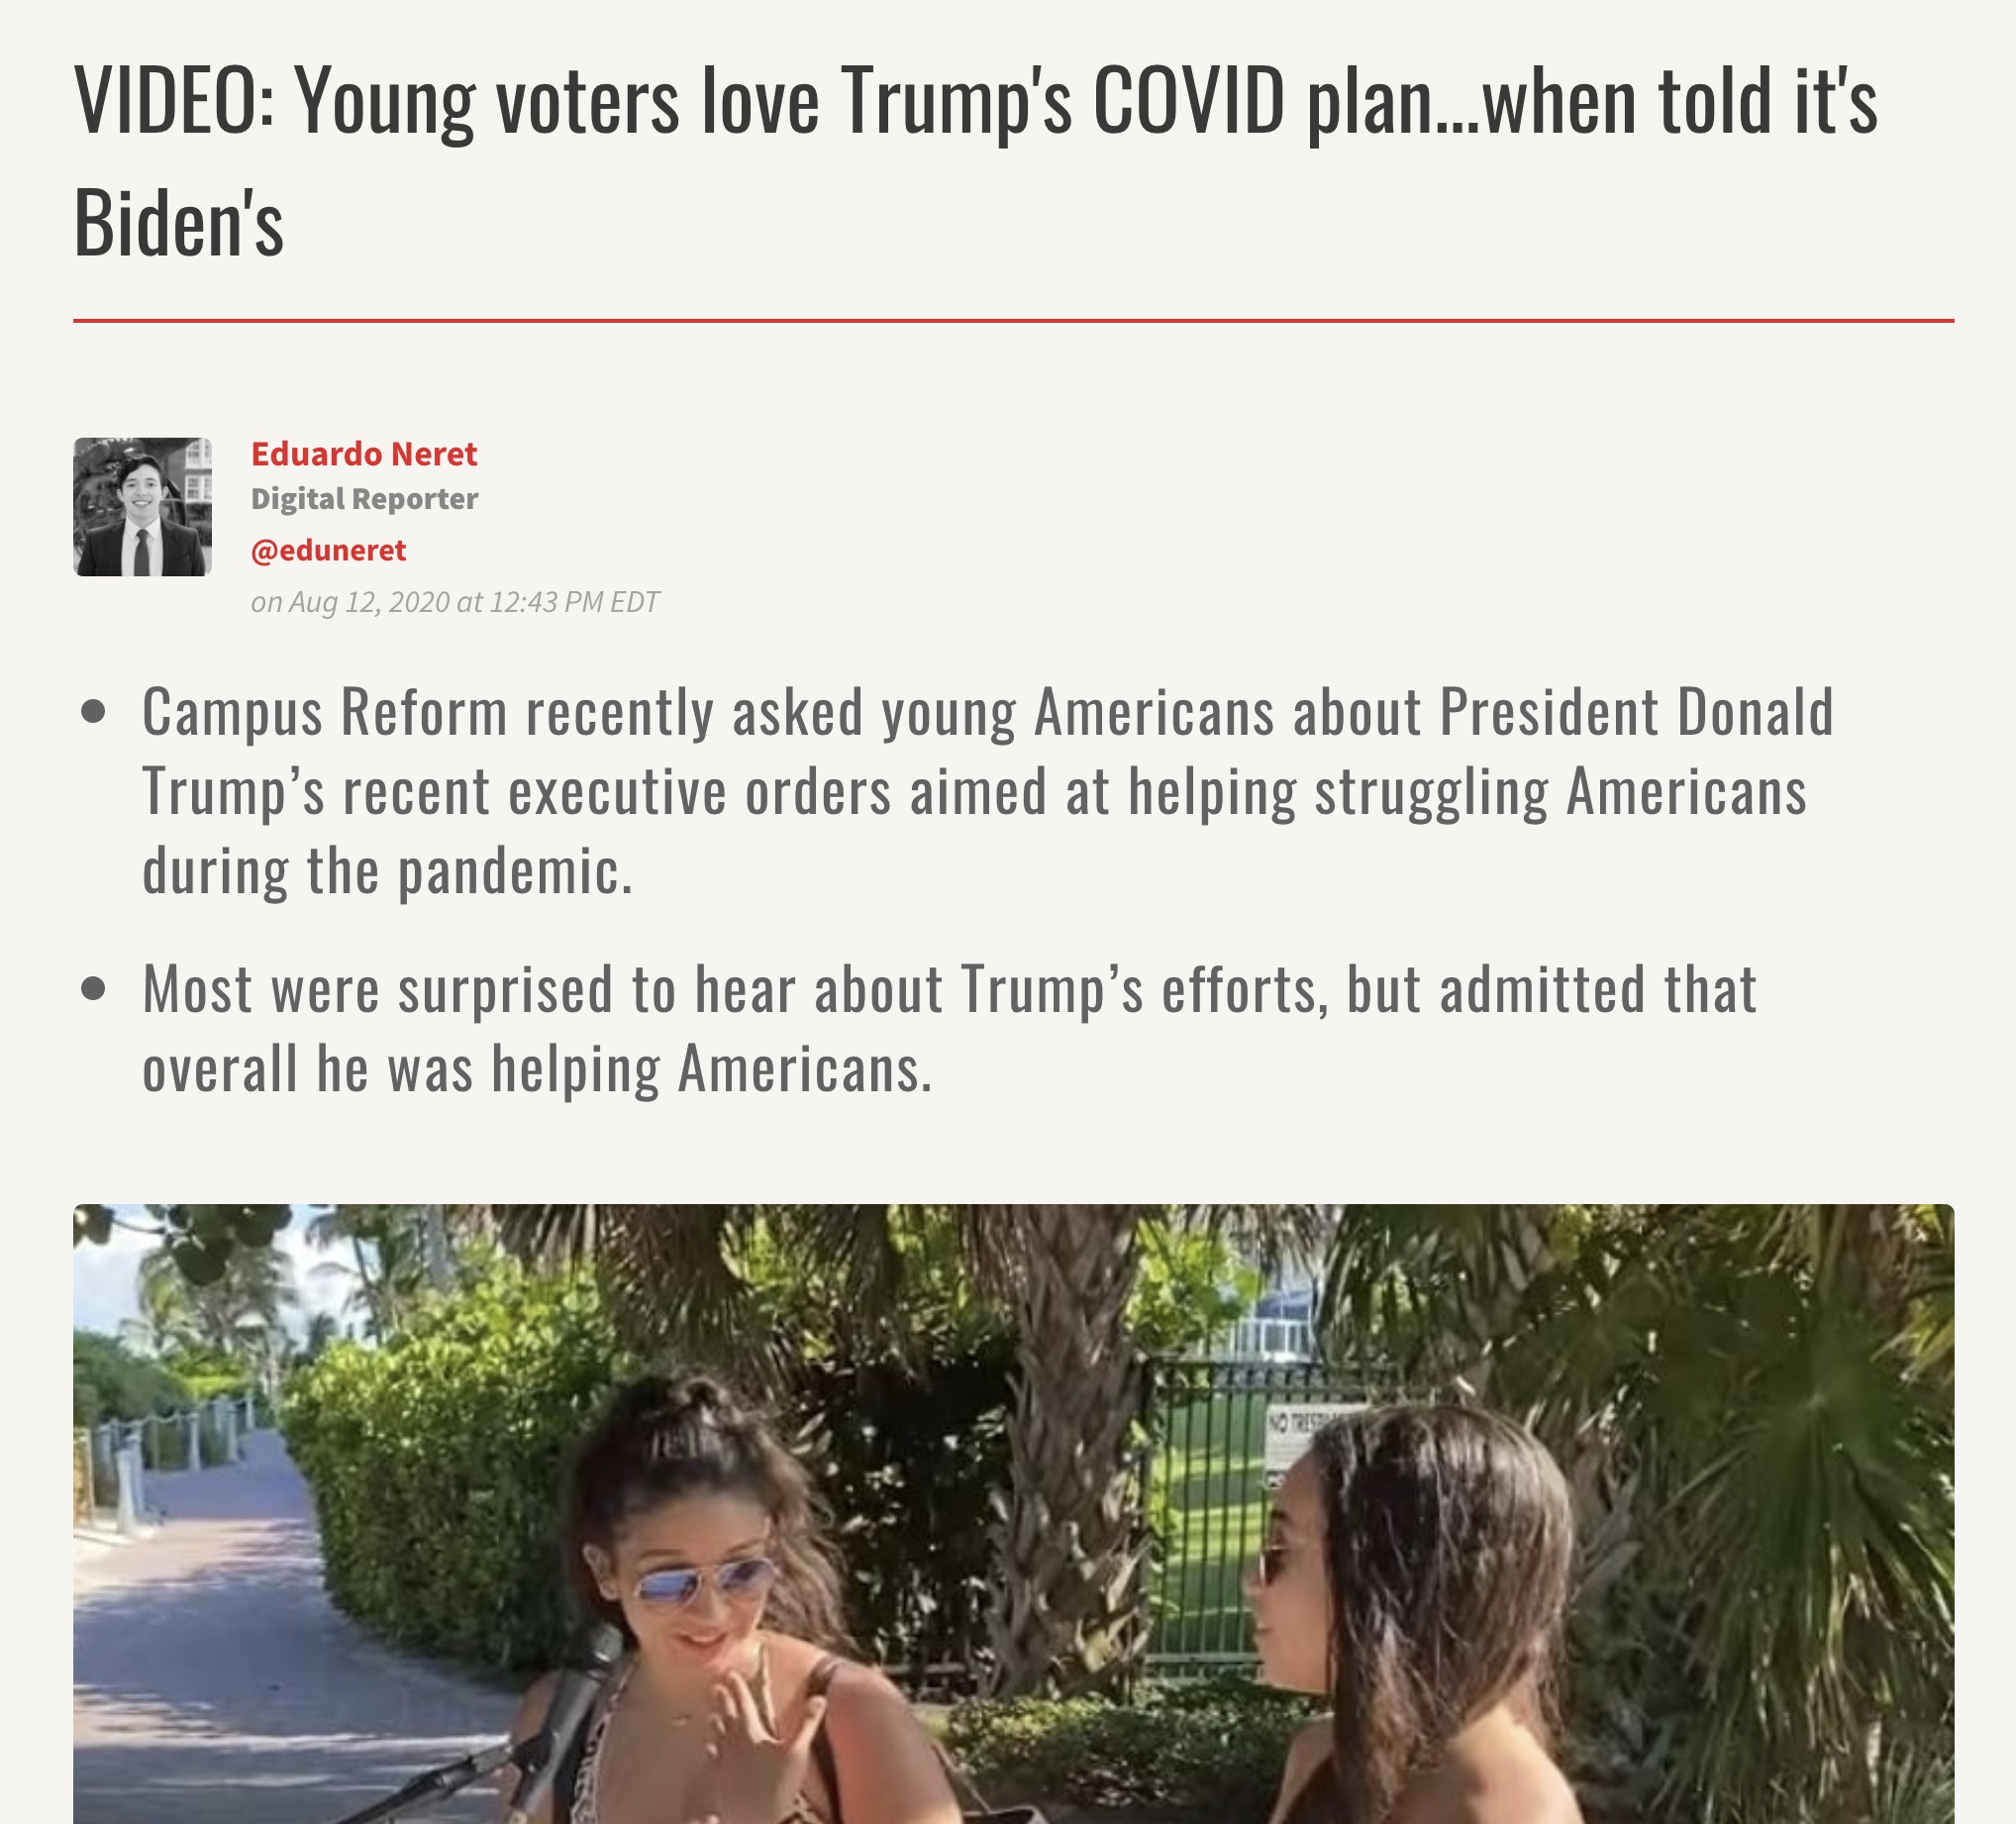 VIDEO: Young voters love Trump's COVID plan...when told it's Biden's 2020-08-14 08-44-19.jpg